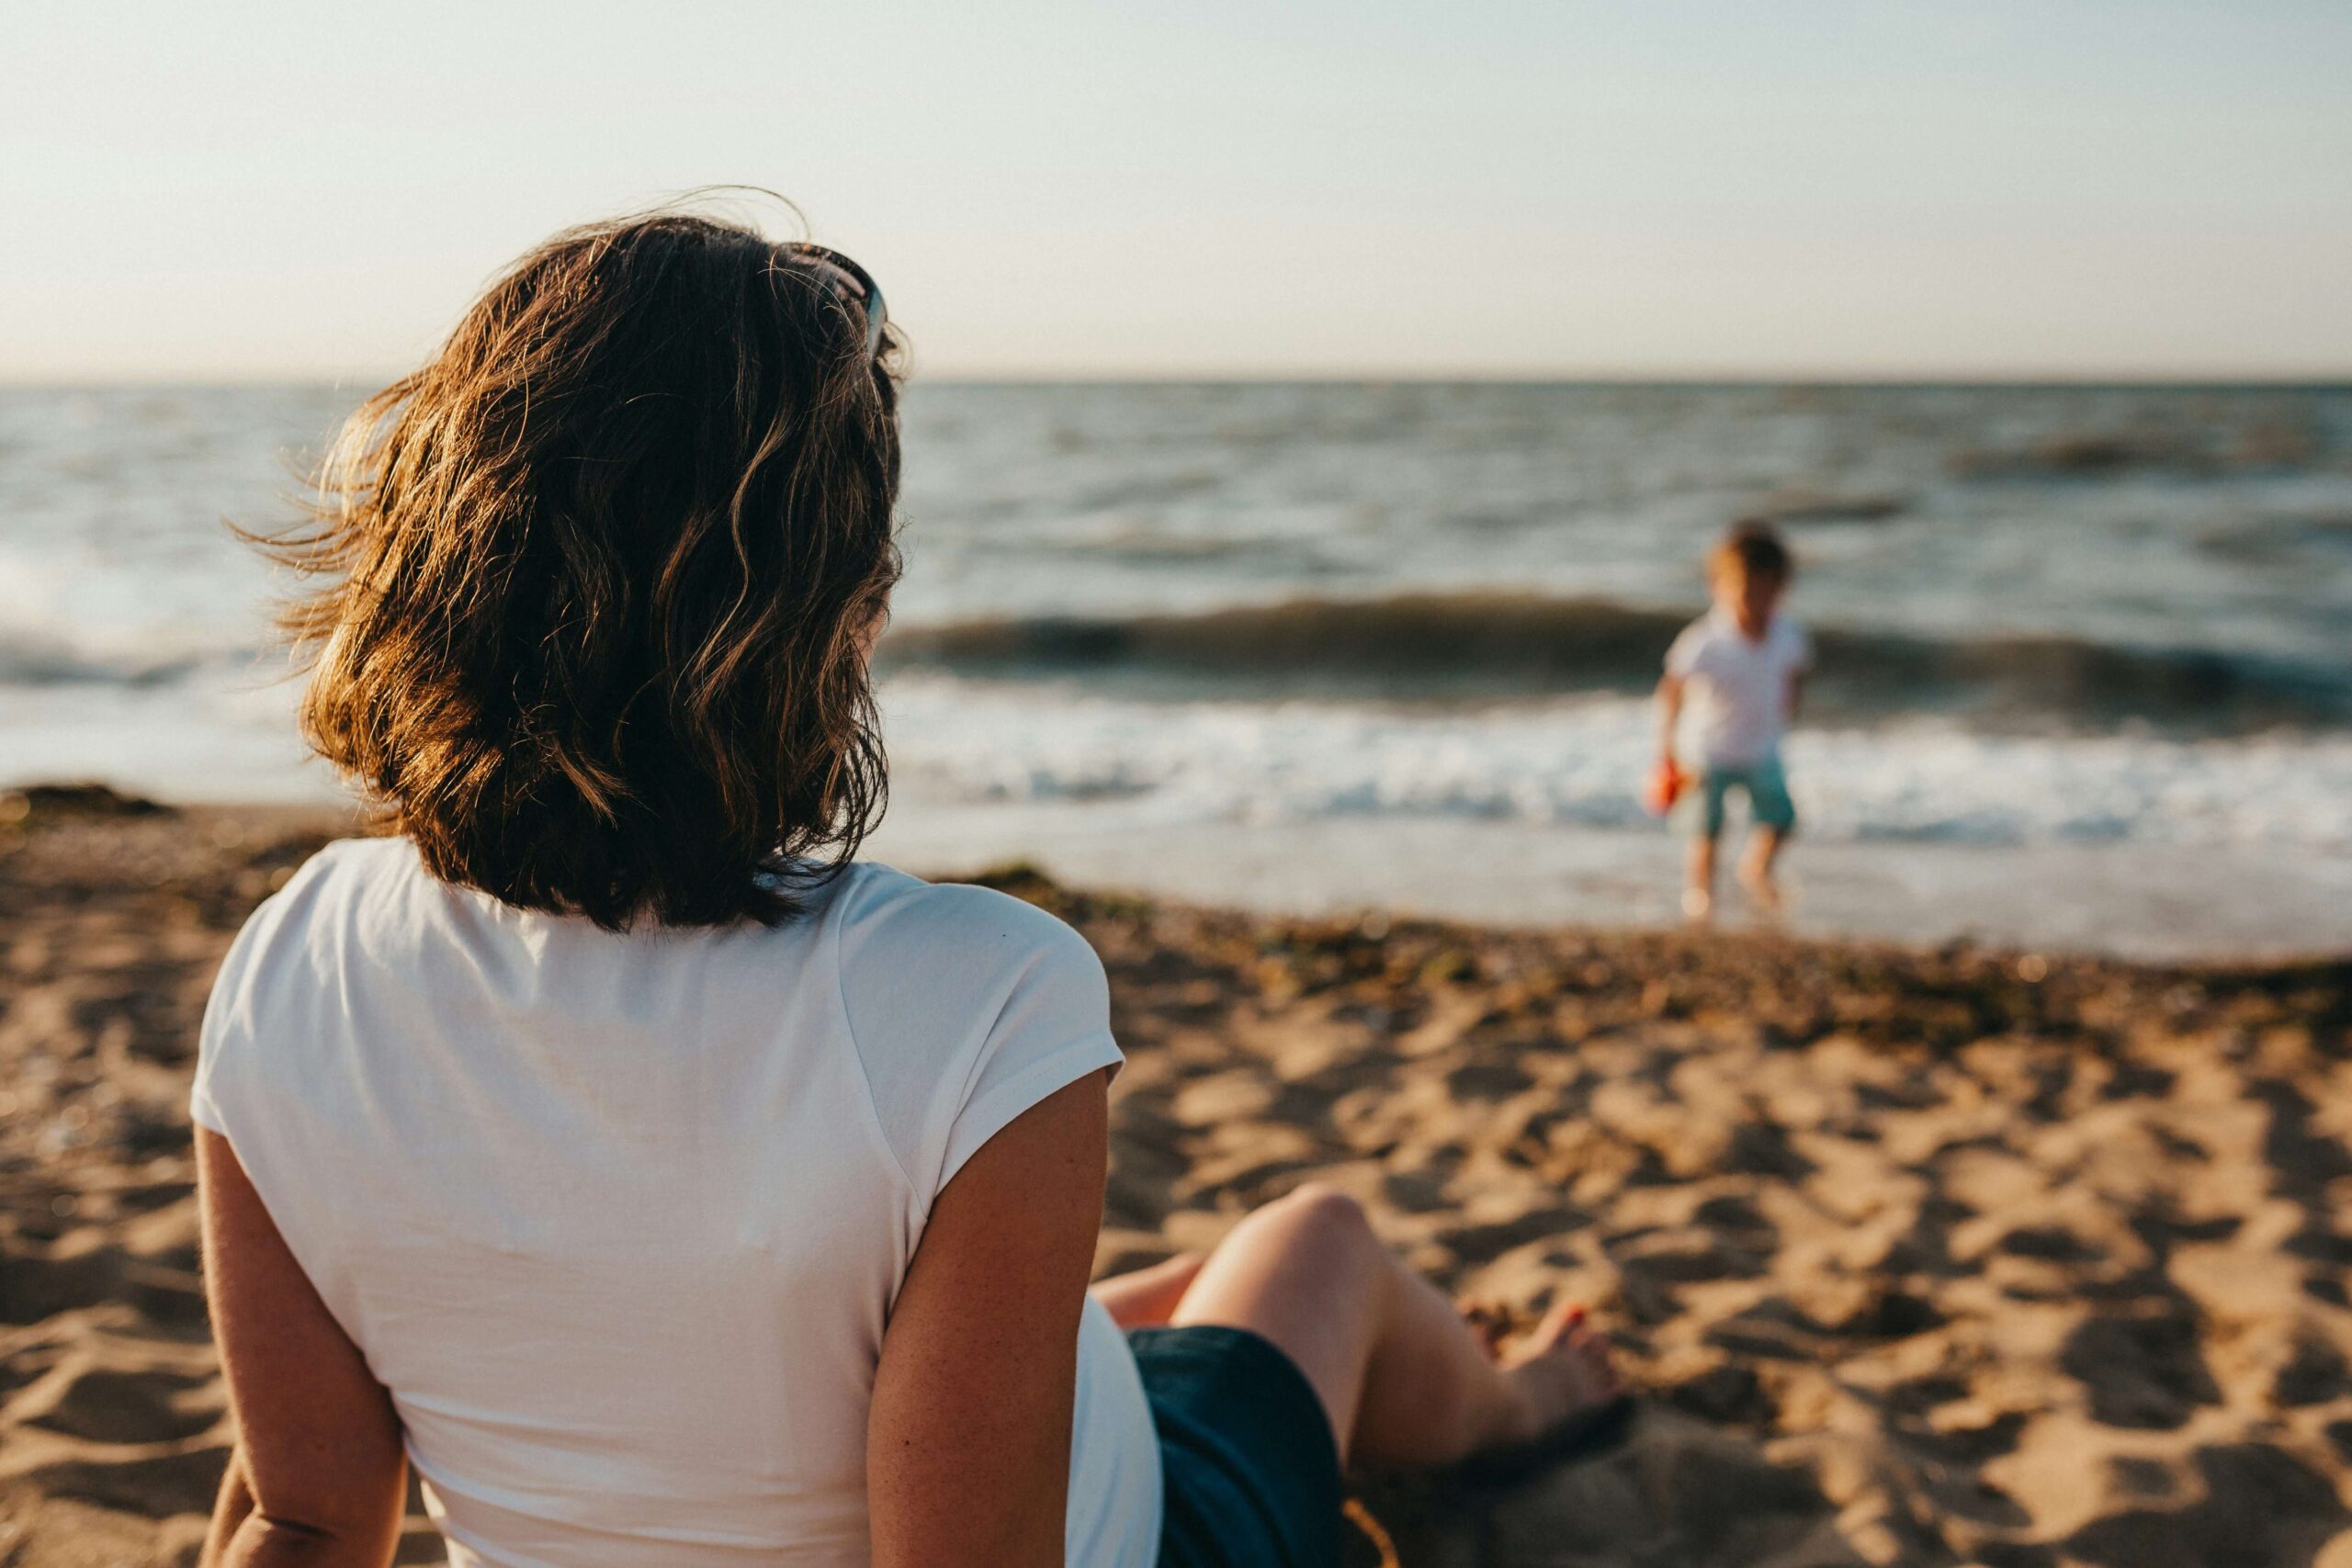 Image of a woman sitting on a beach watching a small child play in the sand. Work with a trauma therapist in Saint Petersburg, FL if you struggle with trauma related memory loss.